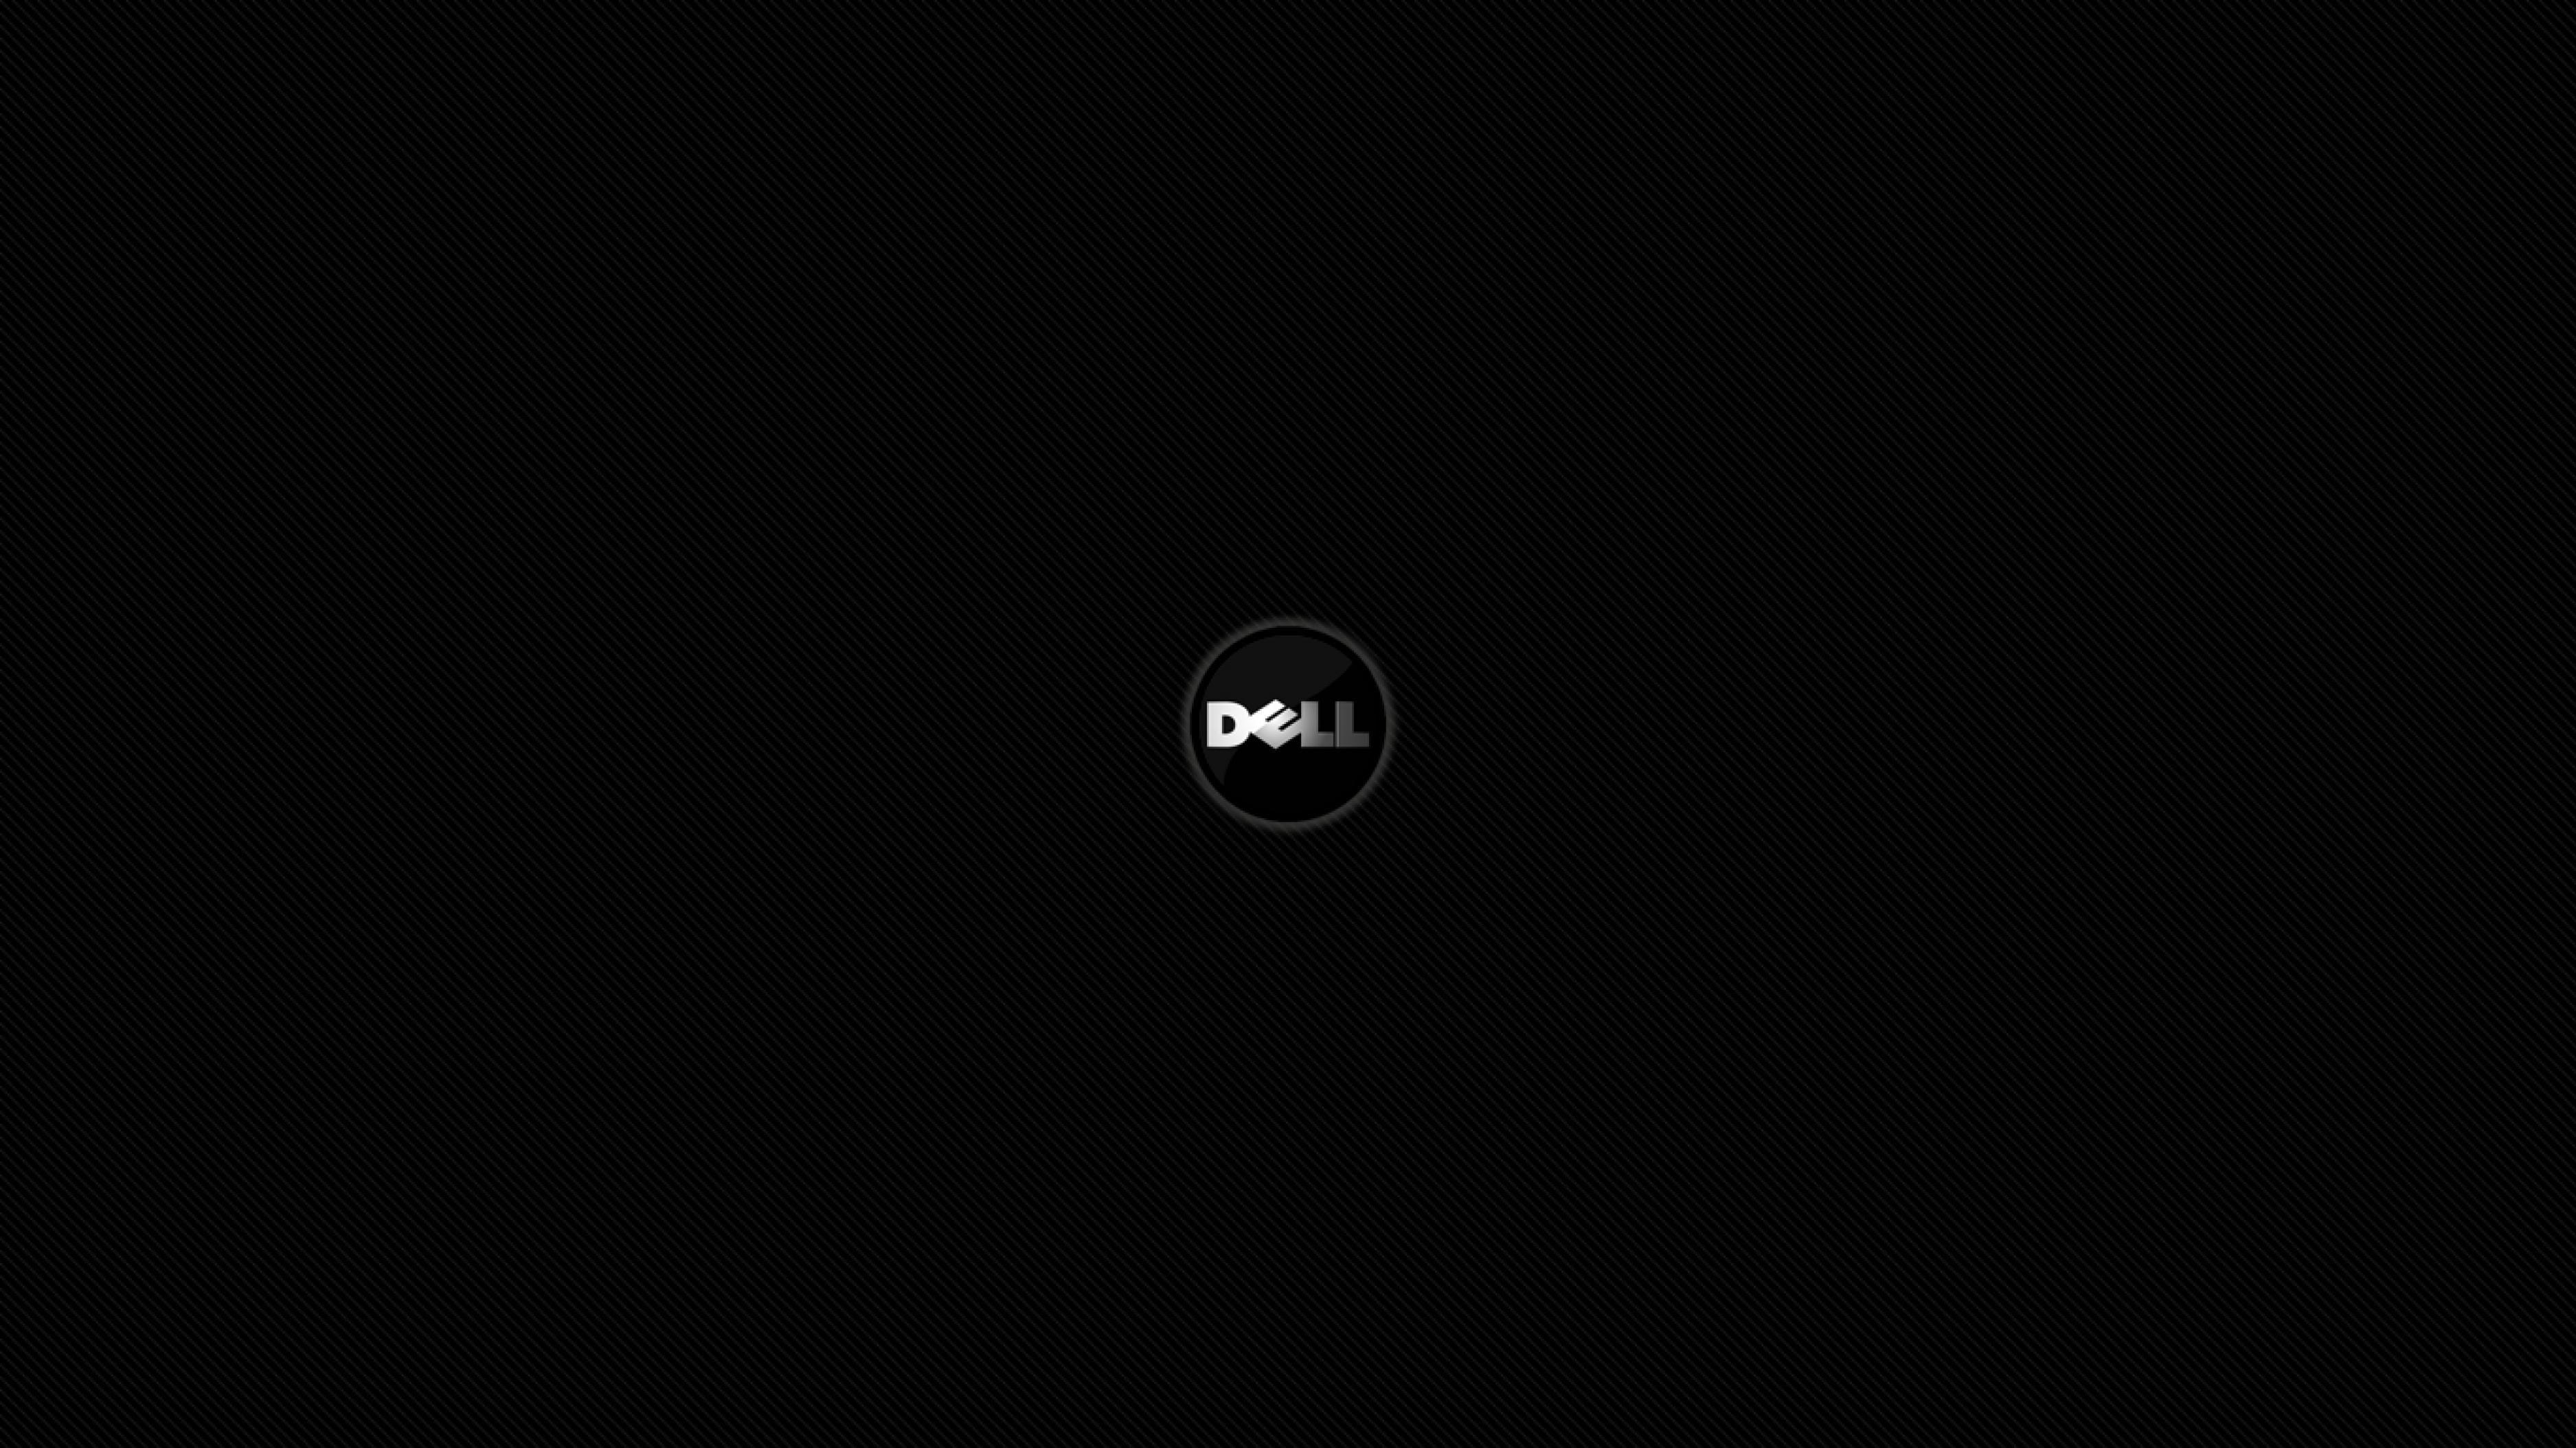 Dell Pc Wallpapers Top Free Dell Pc Backgrounds Wallpaperaccess